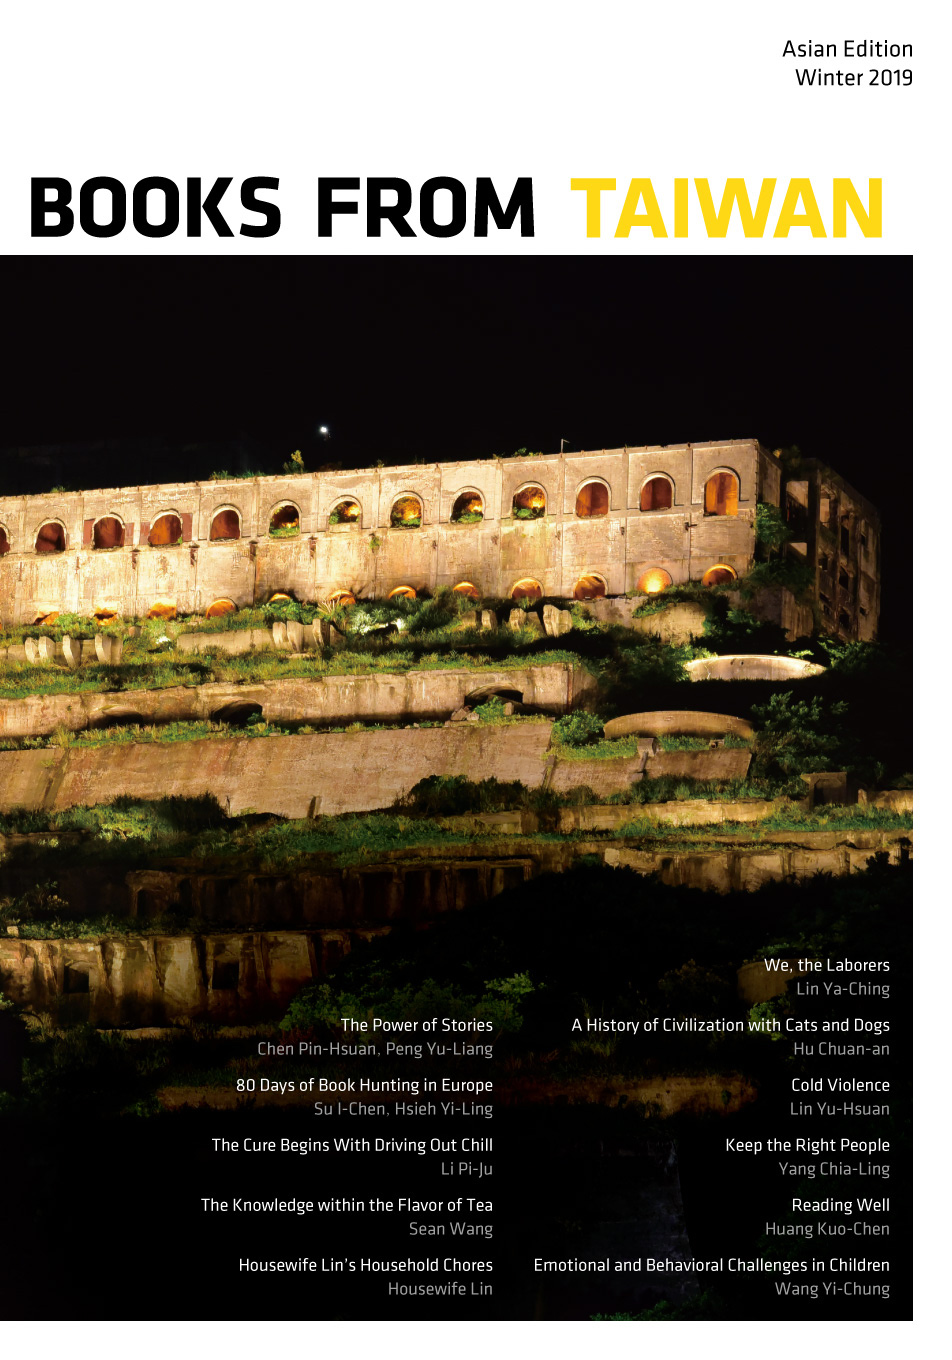 Books from Taiwan Asian Edition 2019